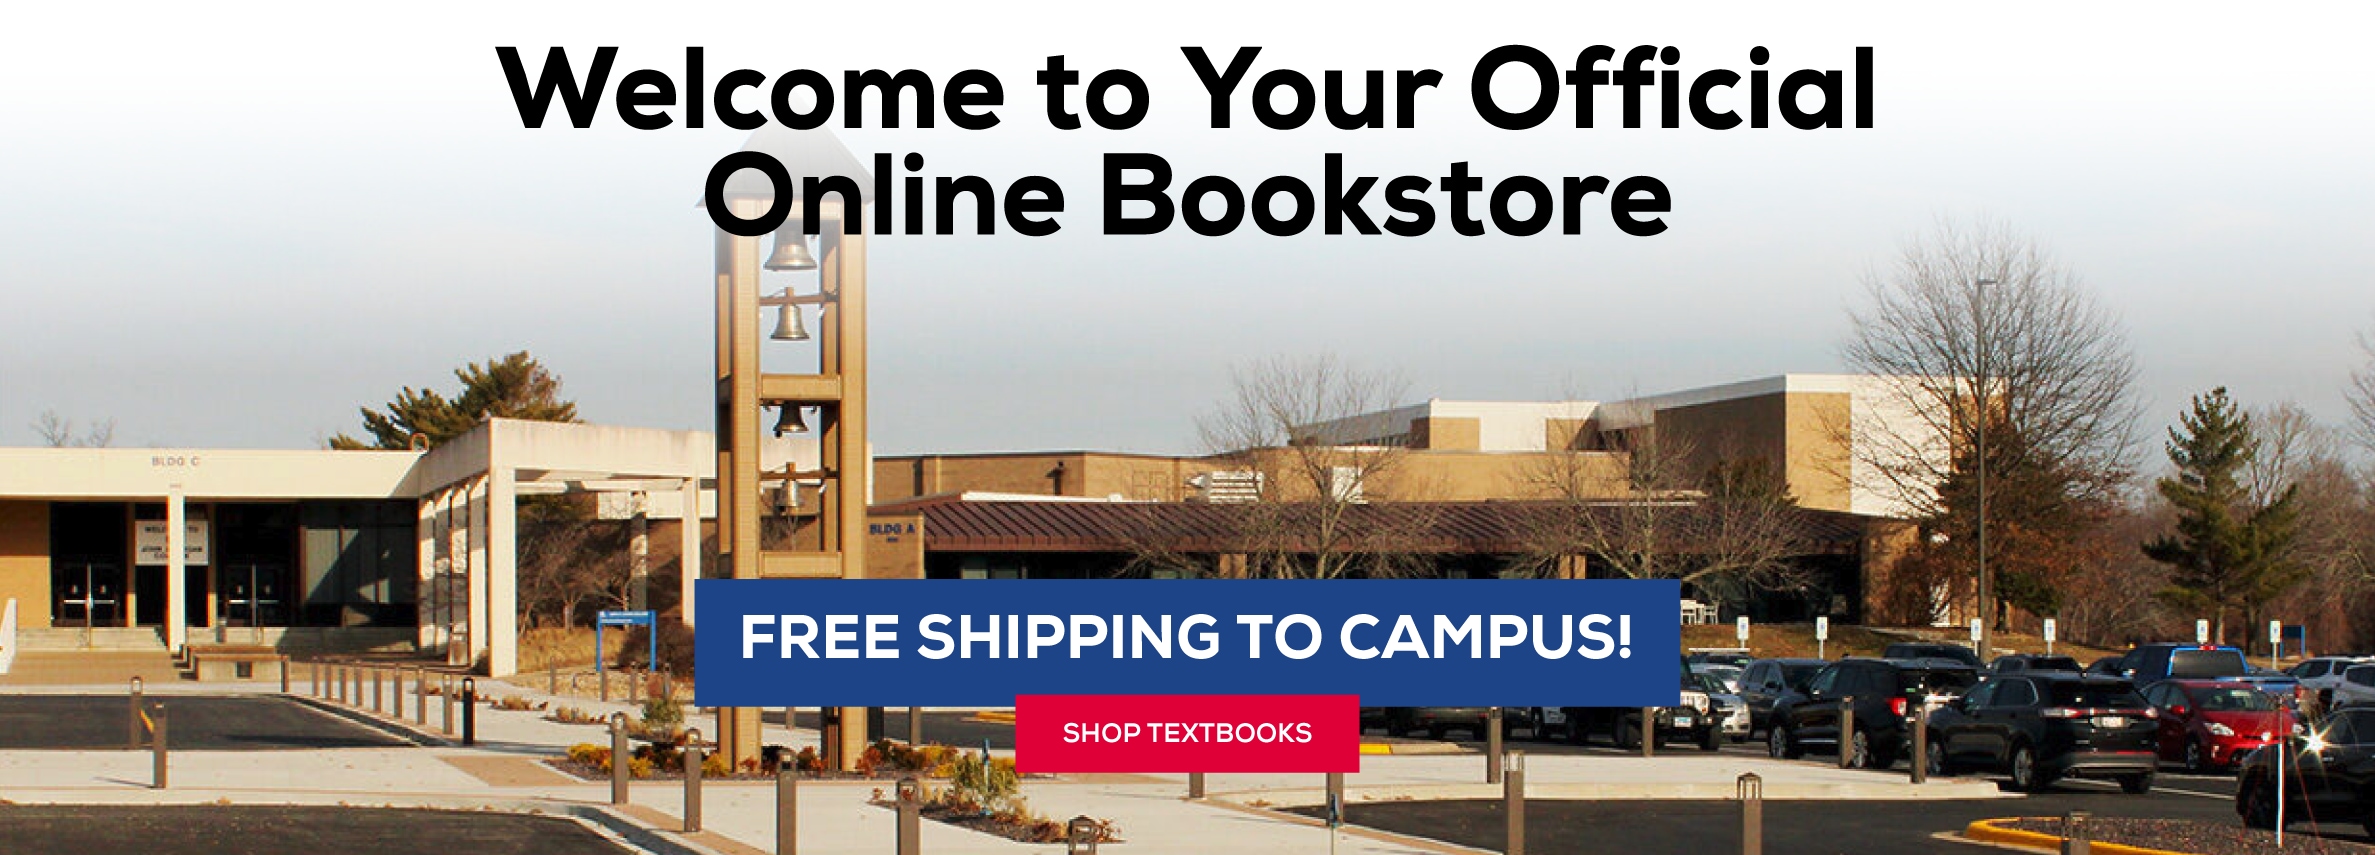 Welcome to Your Official Online Bookstore. Free Shipping to Campus